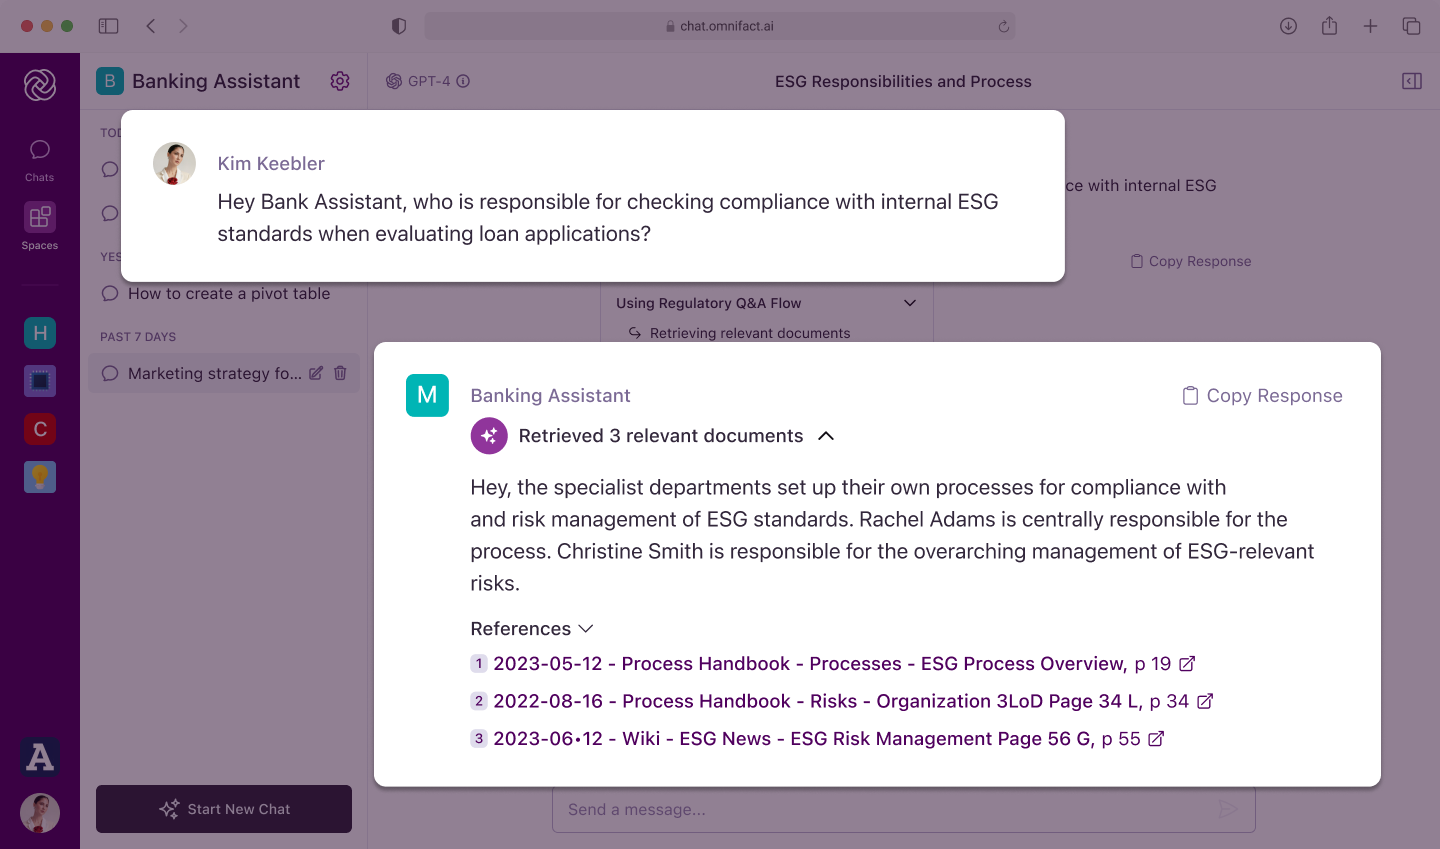 Stylized image of the Omnifact Spaces interface showing a chat where a user asks a custom AI assistant called "Banking Assistant" about responsibility for ESG compliance in loan evaluations. The Assistant gives a useful reply, referencing their processes and risk management documents.